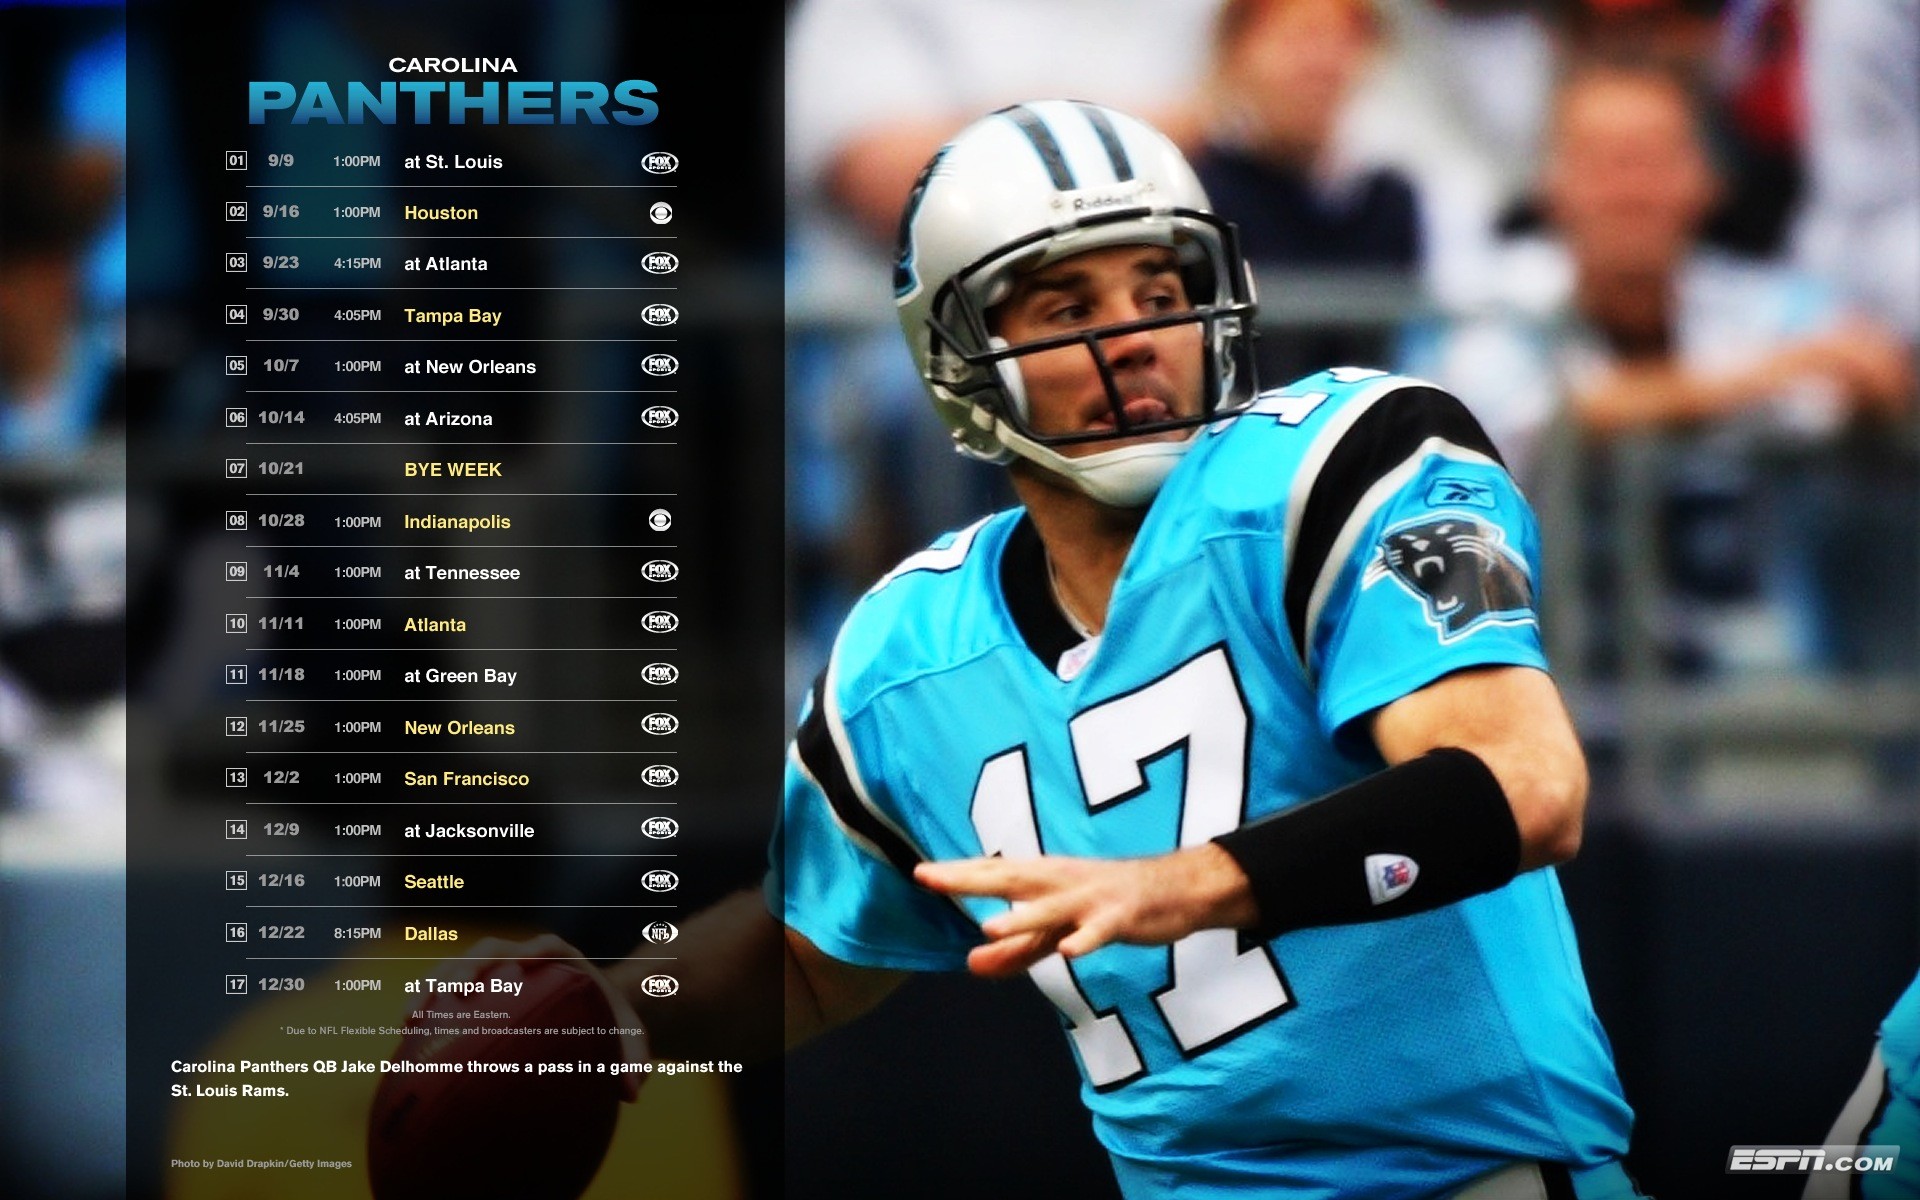 Panthers Wallpaper  2023 NFL Football Wallpapers  Carolina panthers logo  wallpapers Carolina panthers logo Carolina panthers wallpaper